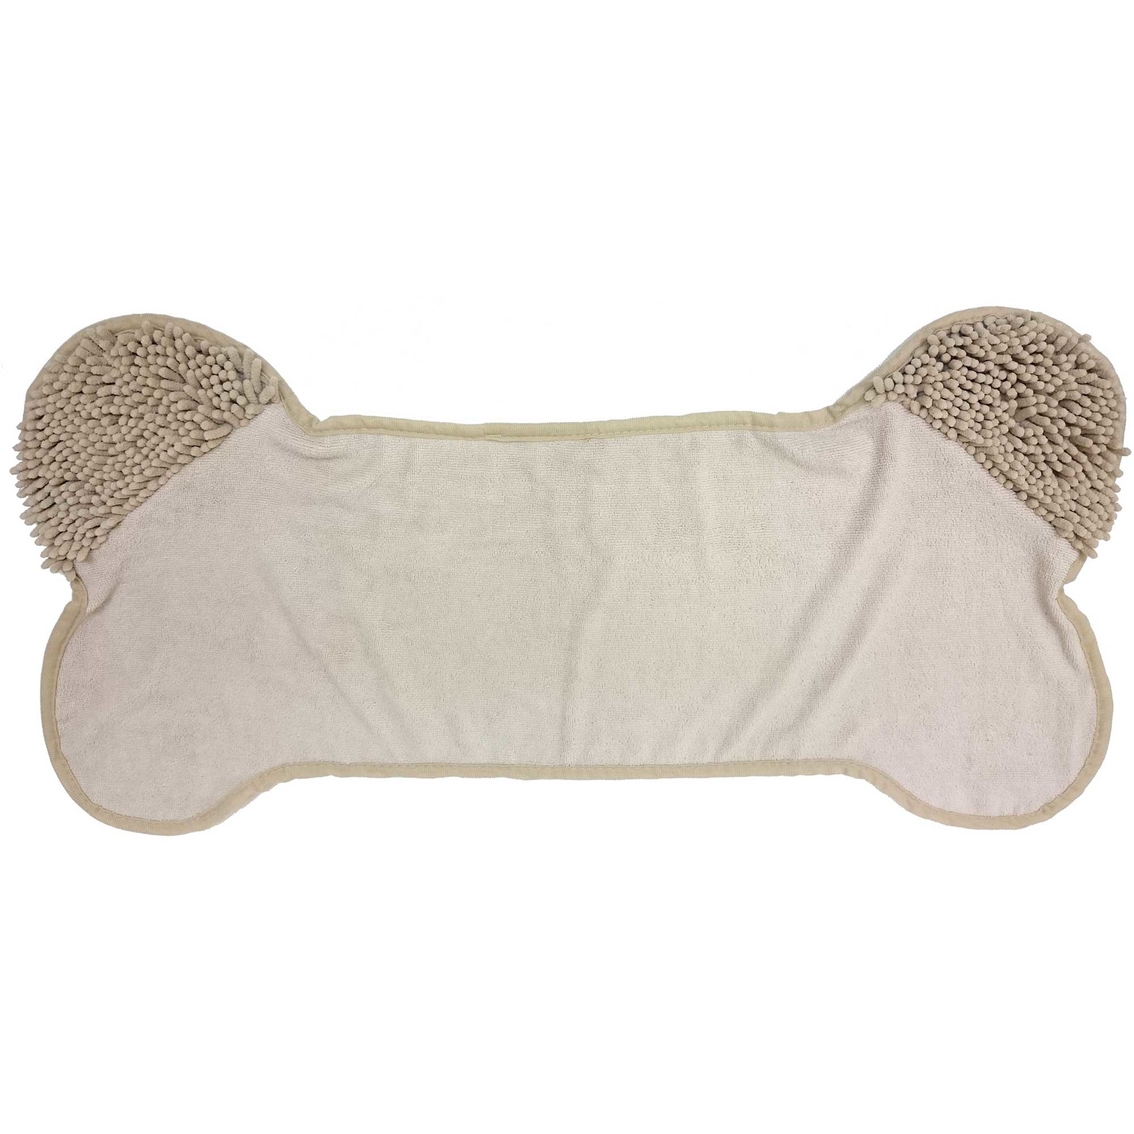 Spot Clean Paws Towel 30 x 16 in. - Image 2 of 4